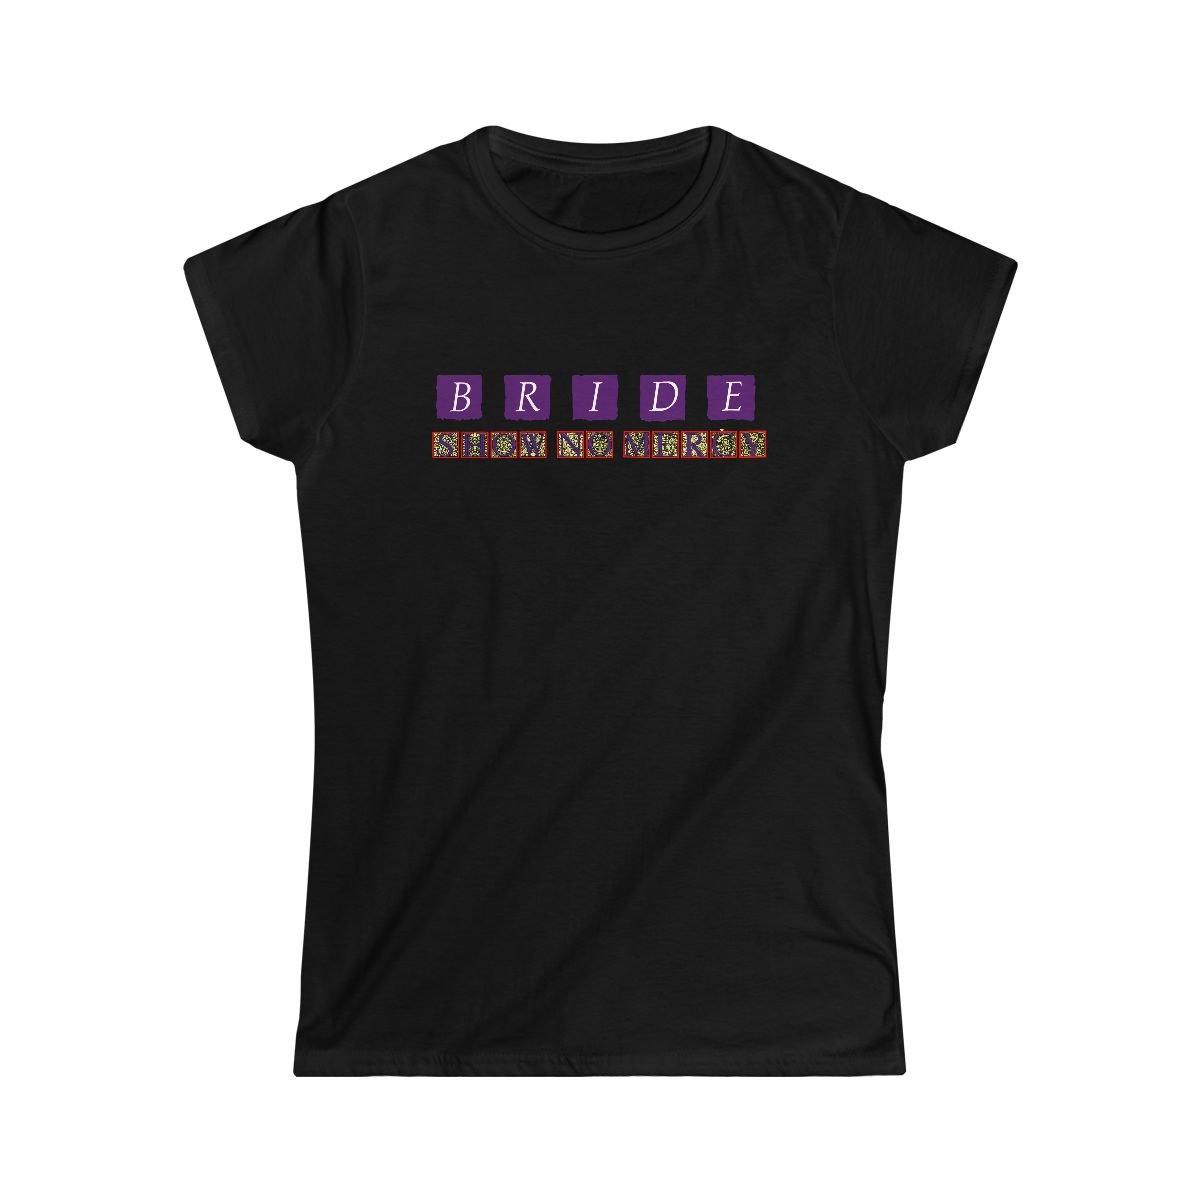 Bride – Show No Mercy Two Sided Women’s Short Sleeve Tshirt 64000LD